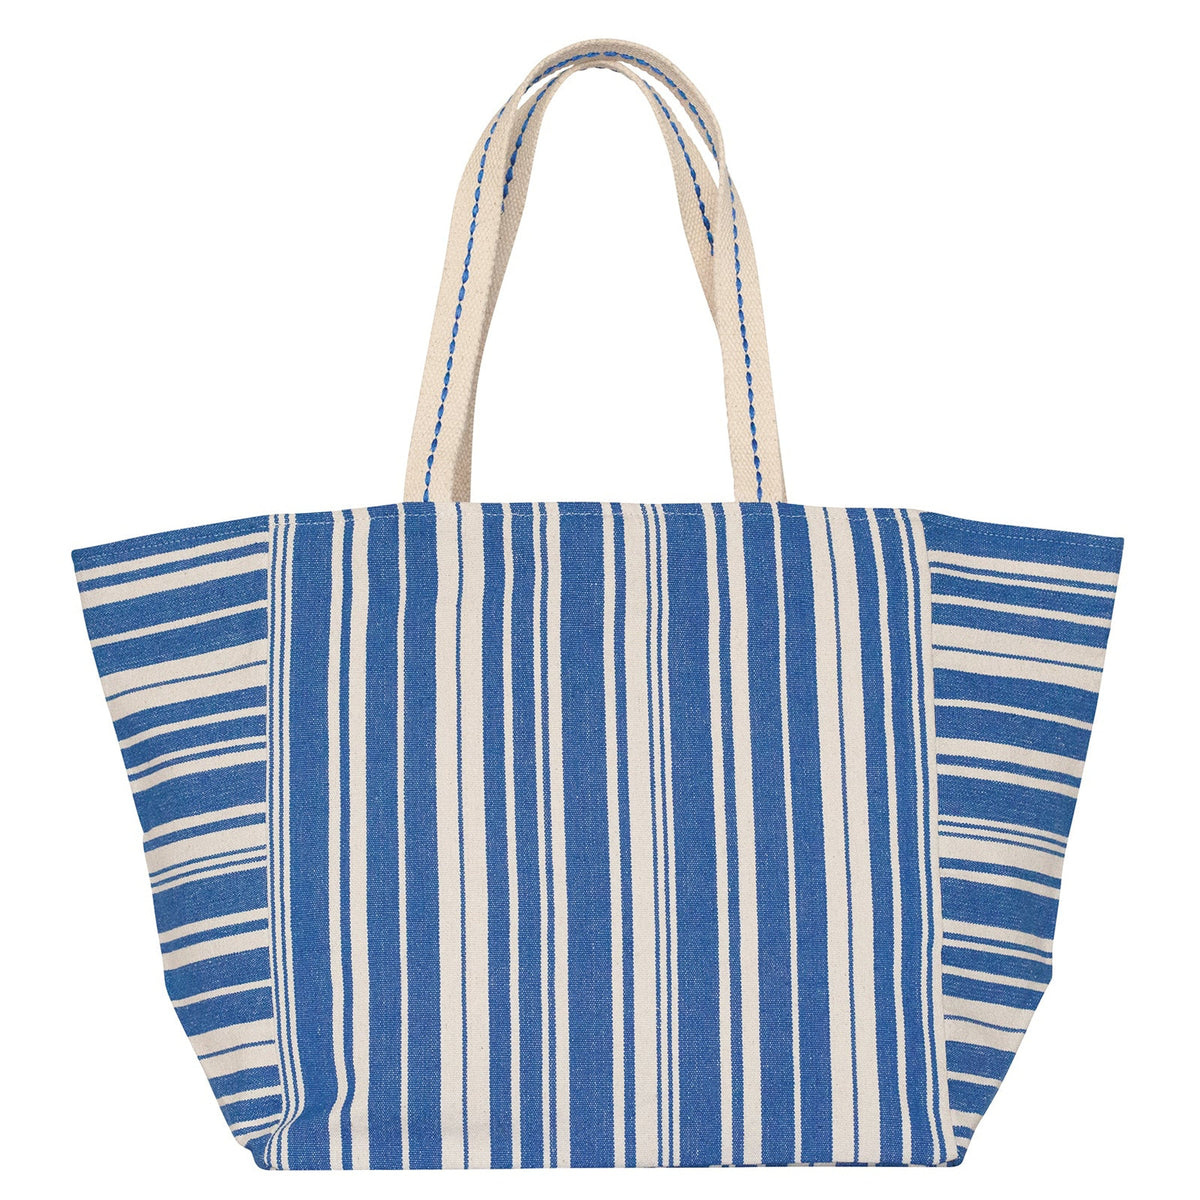 Woven Stripe Carryall Tote